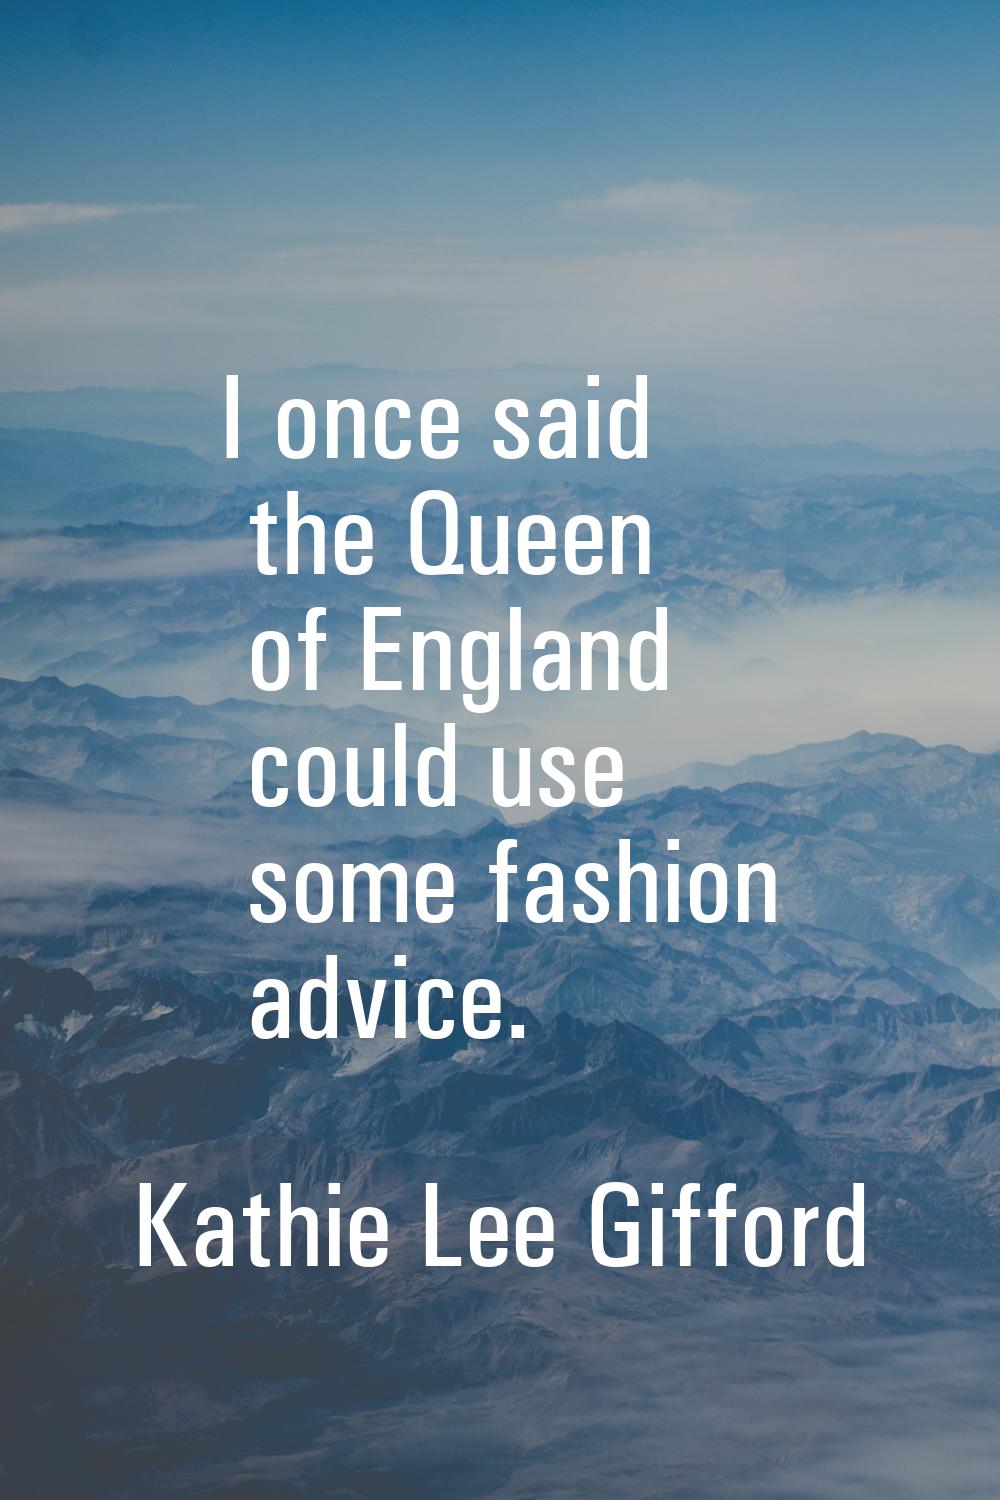 I once said the Queen of England could use some fashion advice.